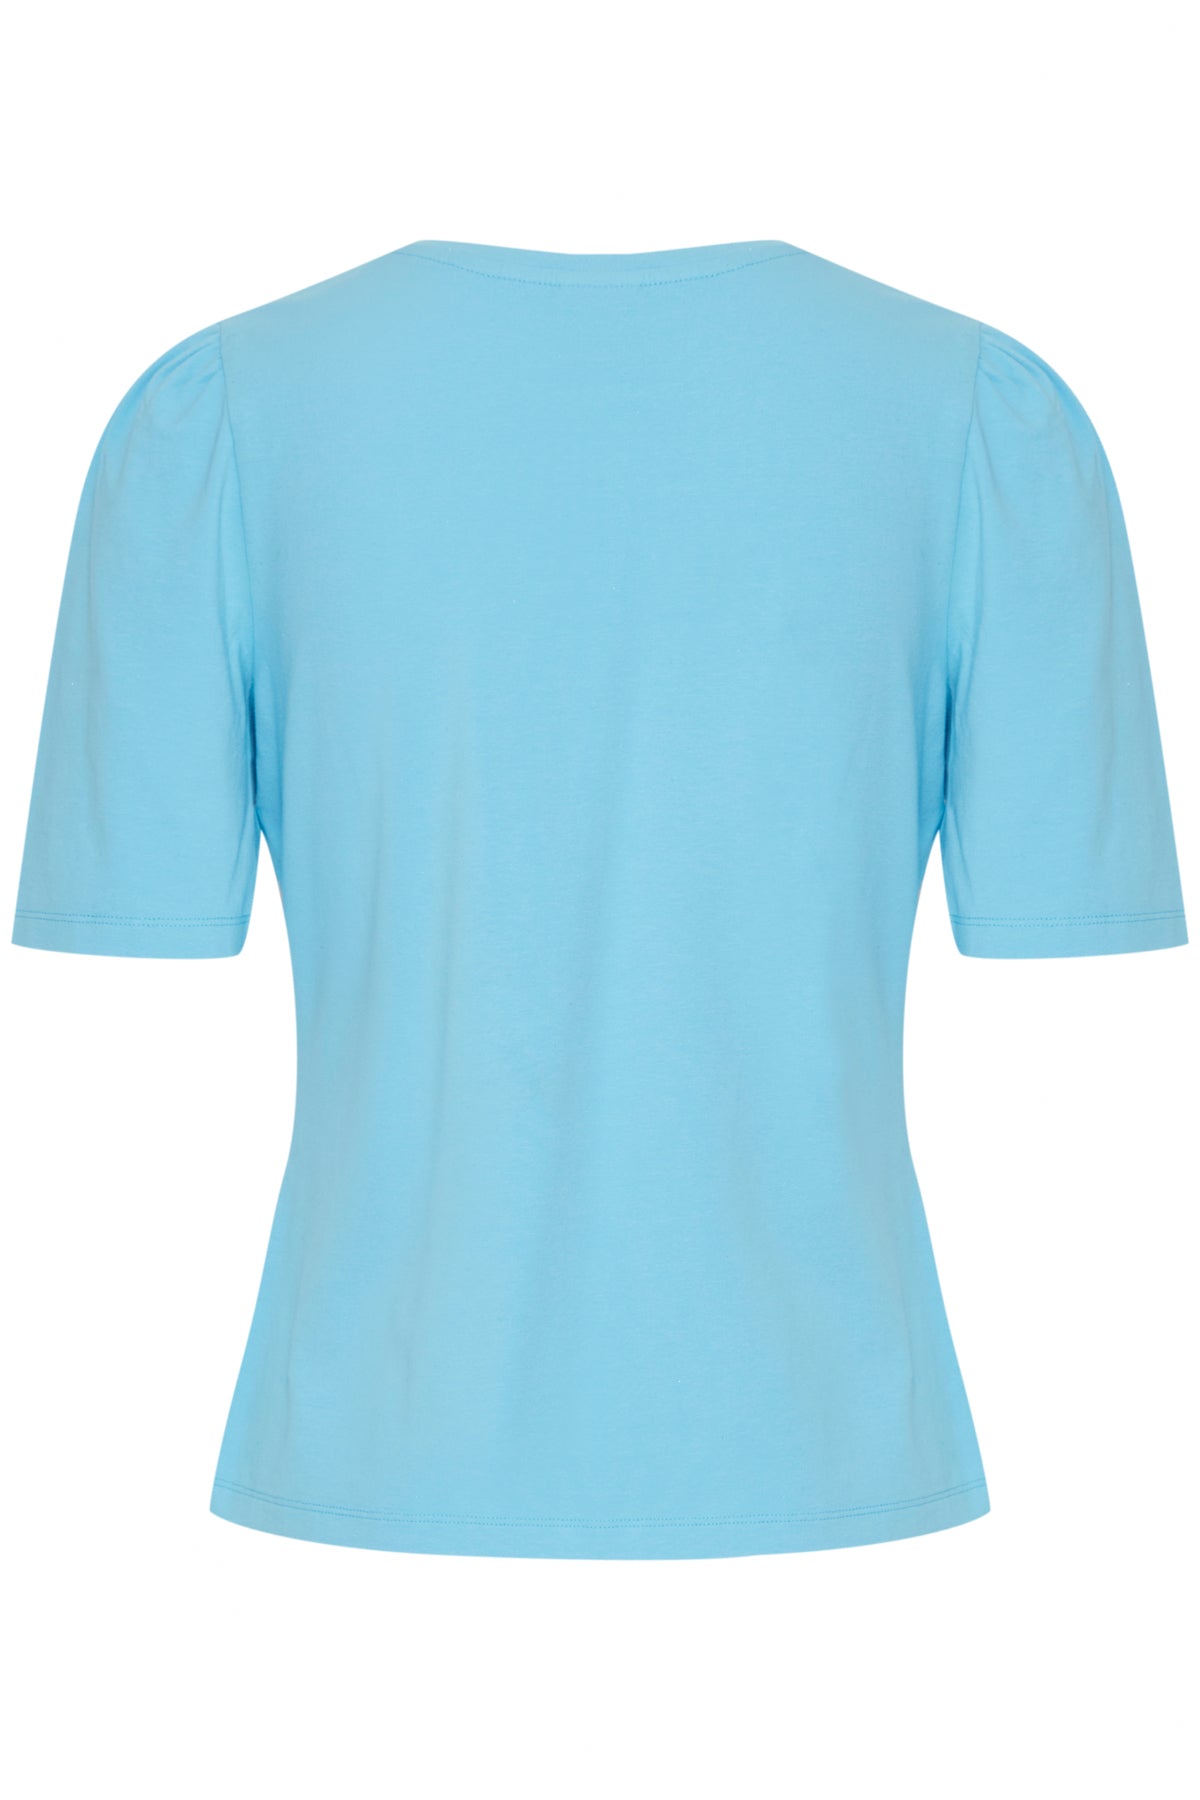 Lilvina Basic Tee in Blue Grotto